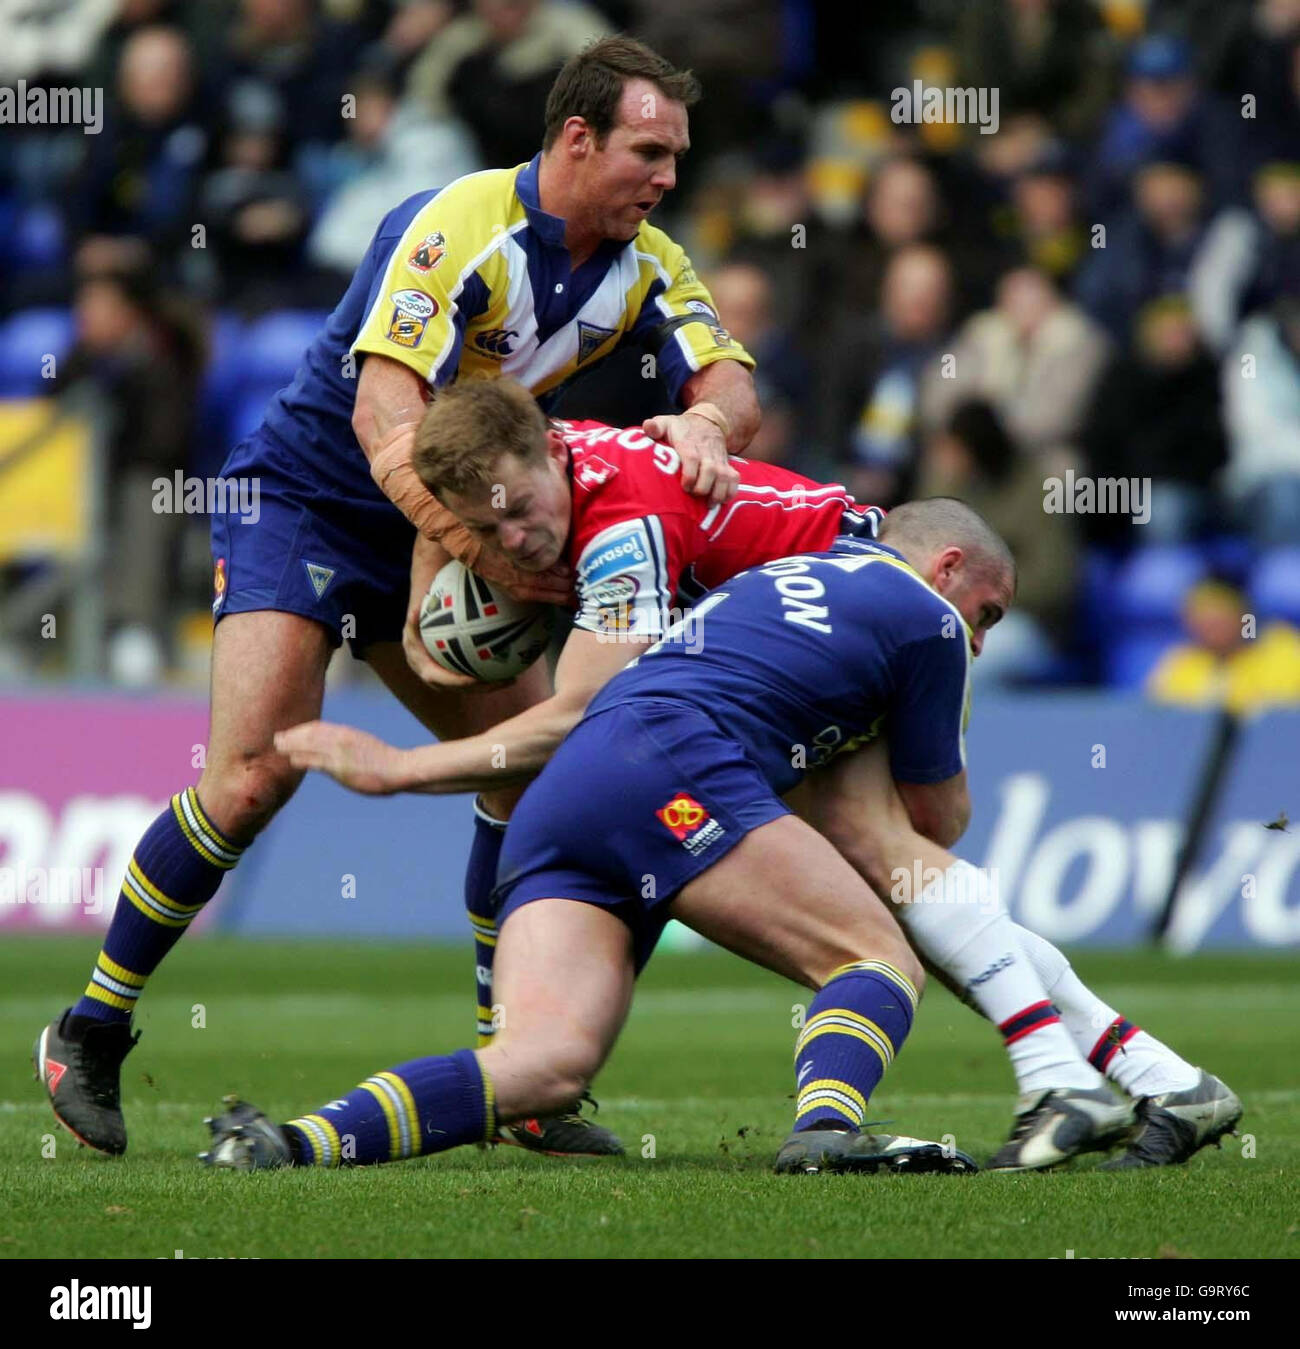 Hull KR's Jon Goddard (centre) is tackled by Warrington's Paul Johnson (right) during the engage Super League match at The Halliwell Jones Stadium, Warrington. Stock Photo